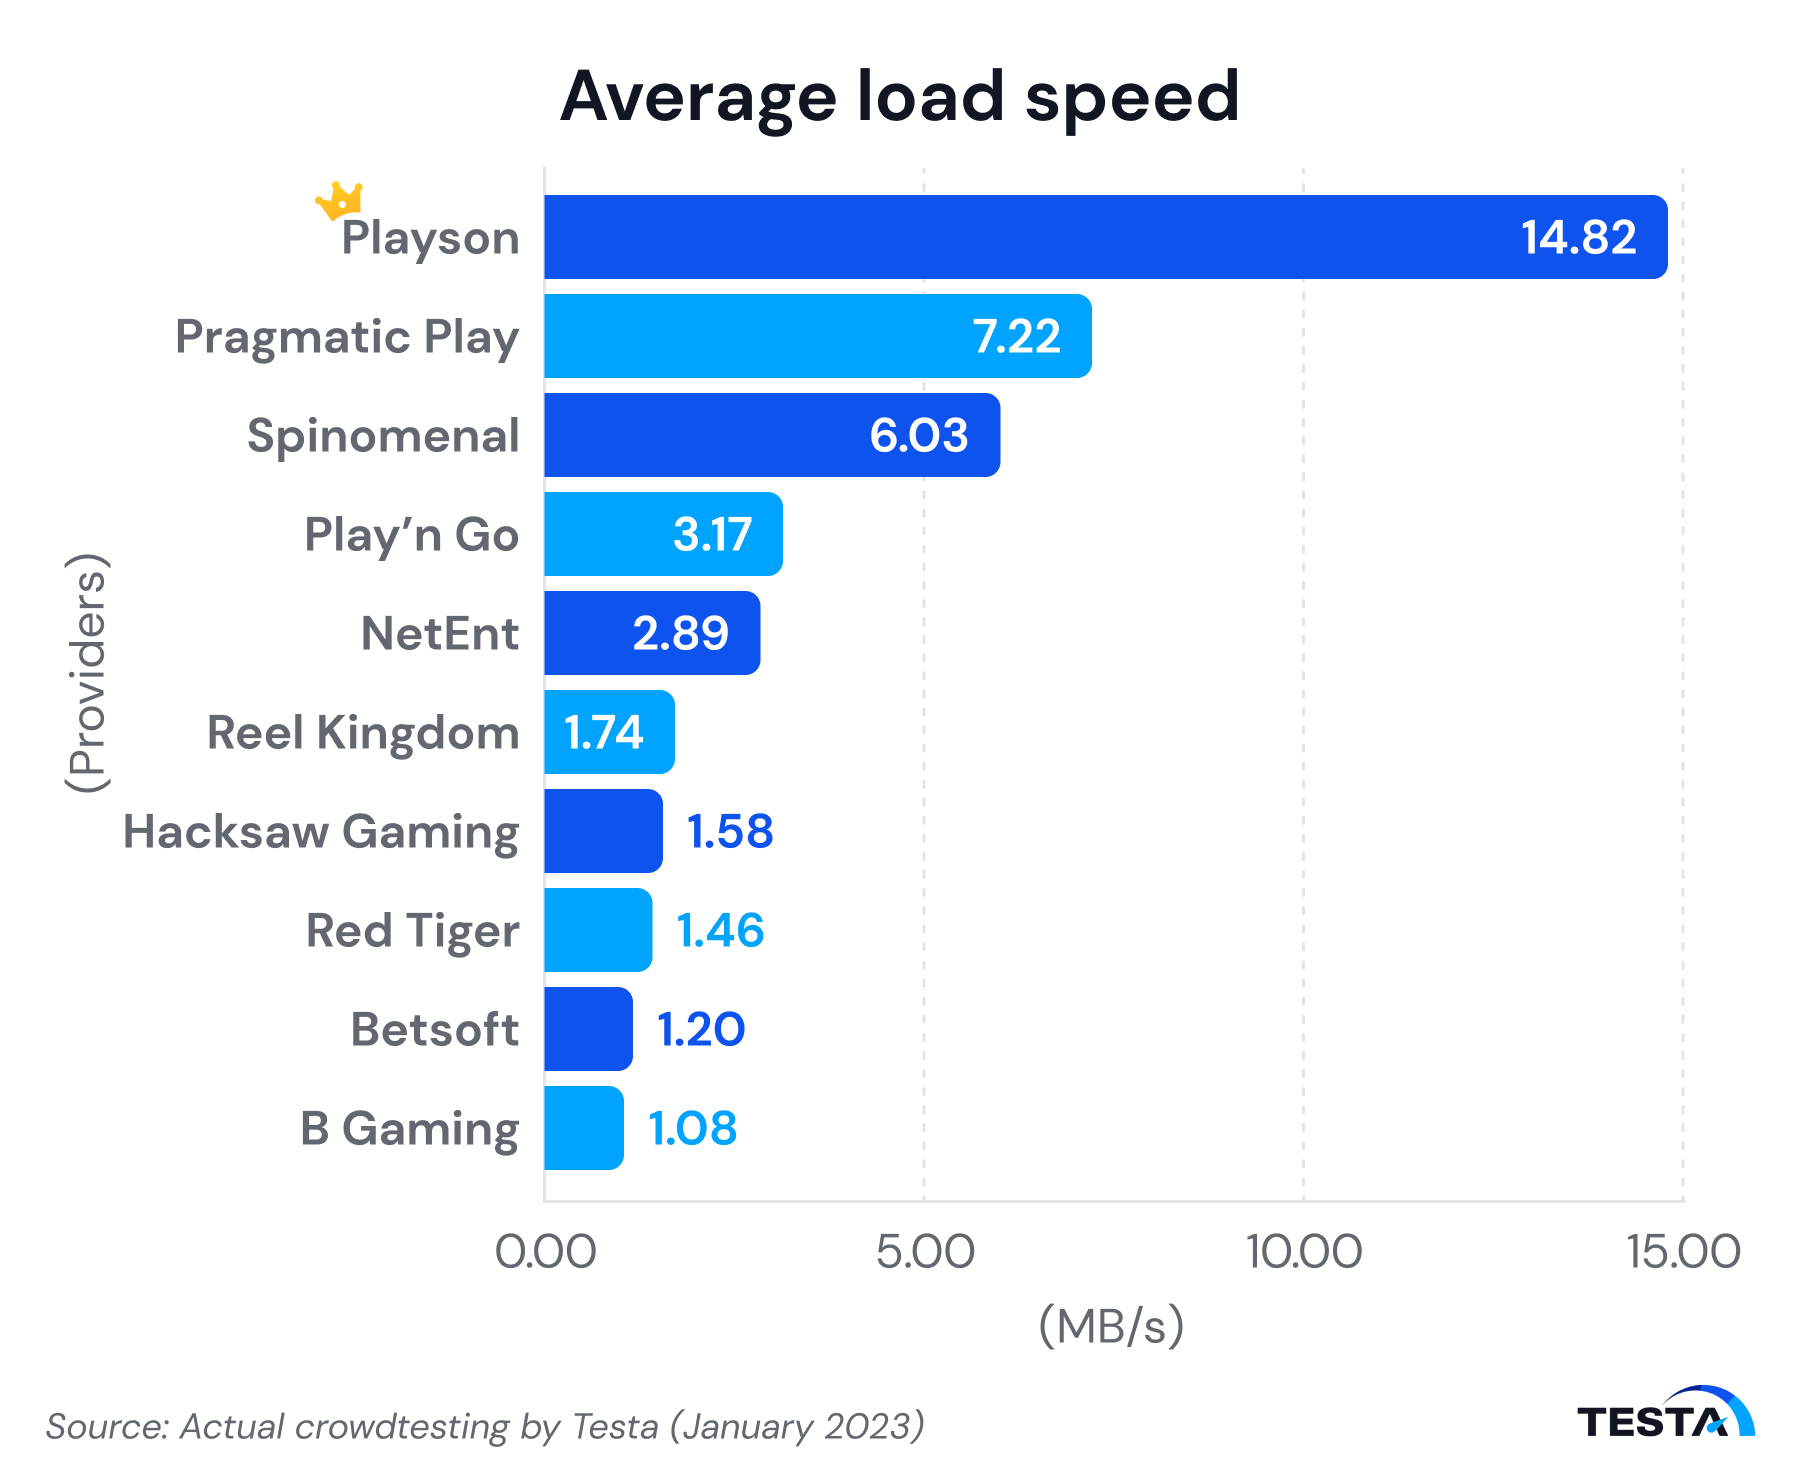 India’s iGaming providers average load speed